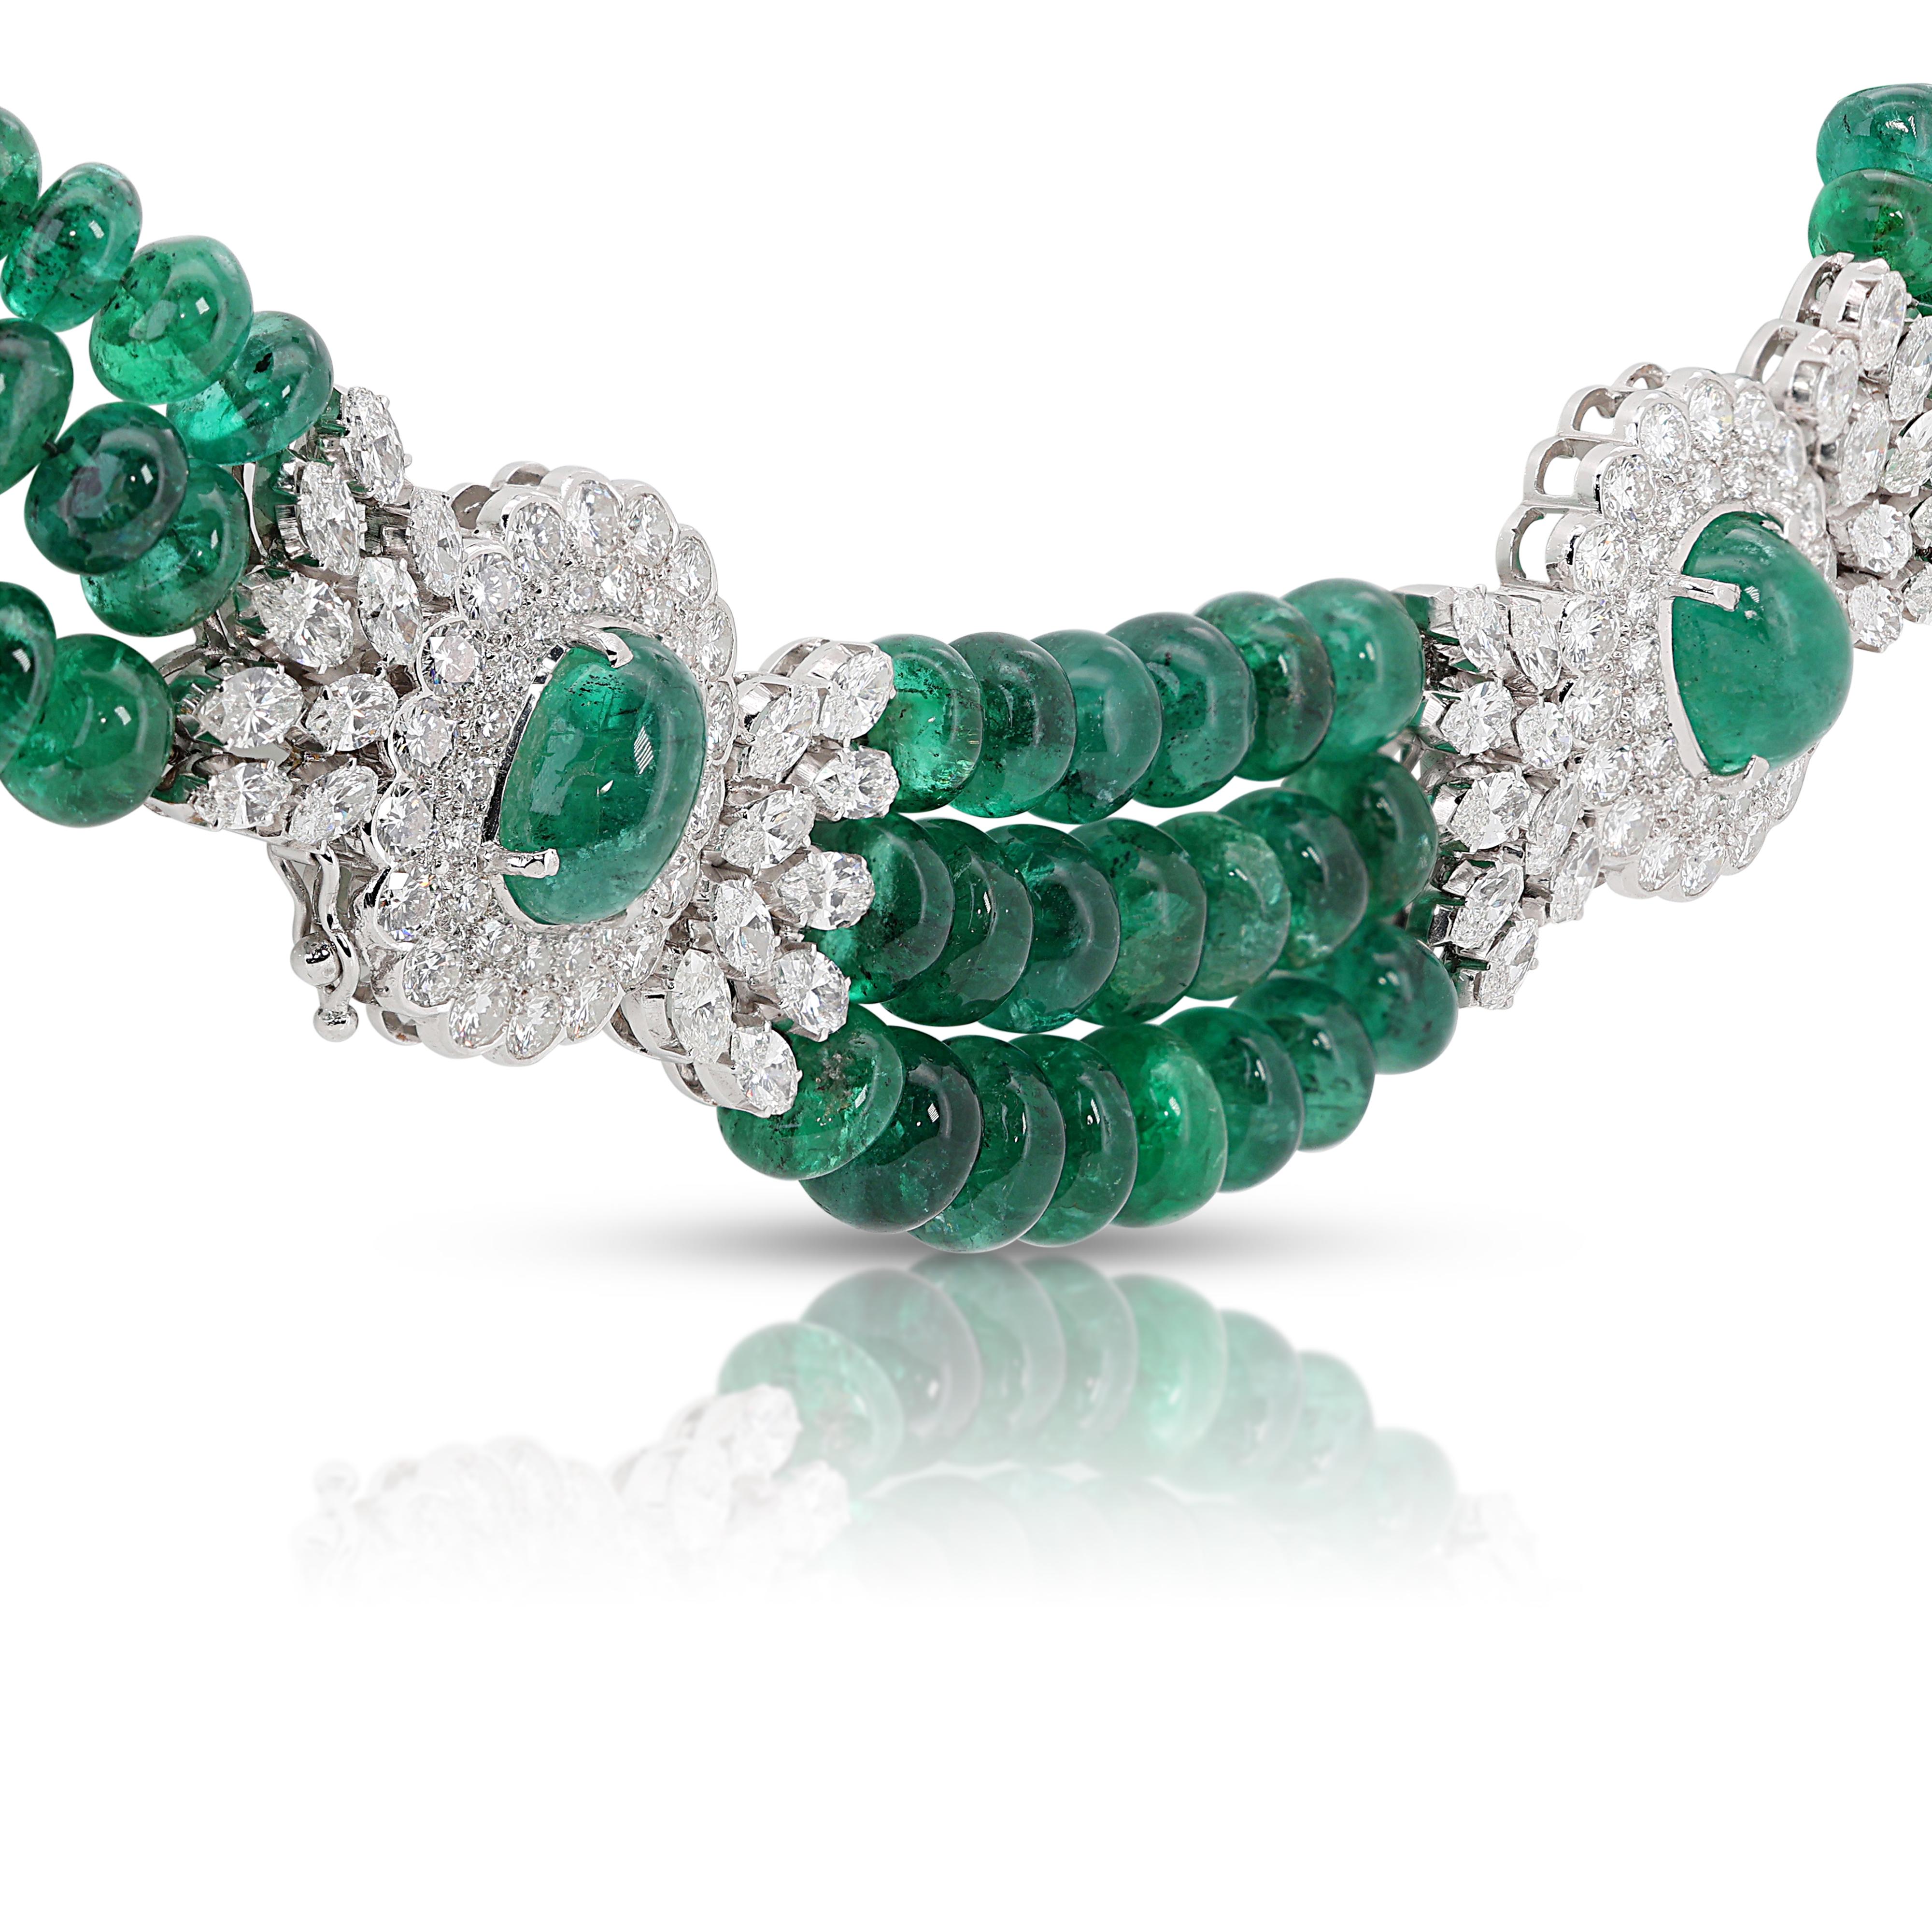 Cabochon Enchanting 146.85ct Emerald Collar Necklace with Diamonds in 18K White Gold  For Sale